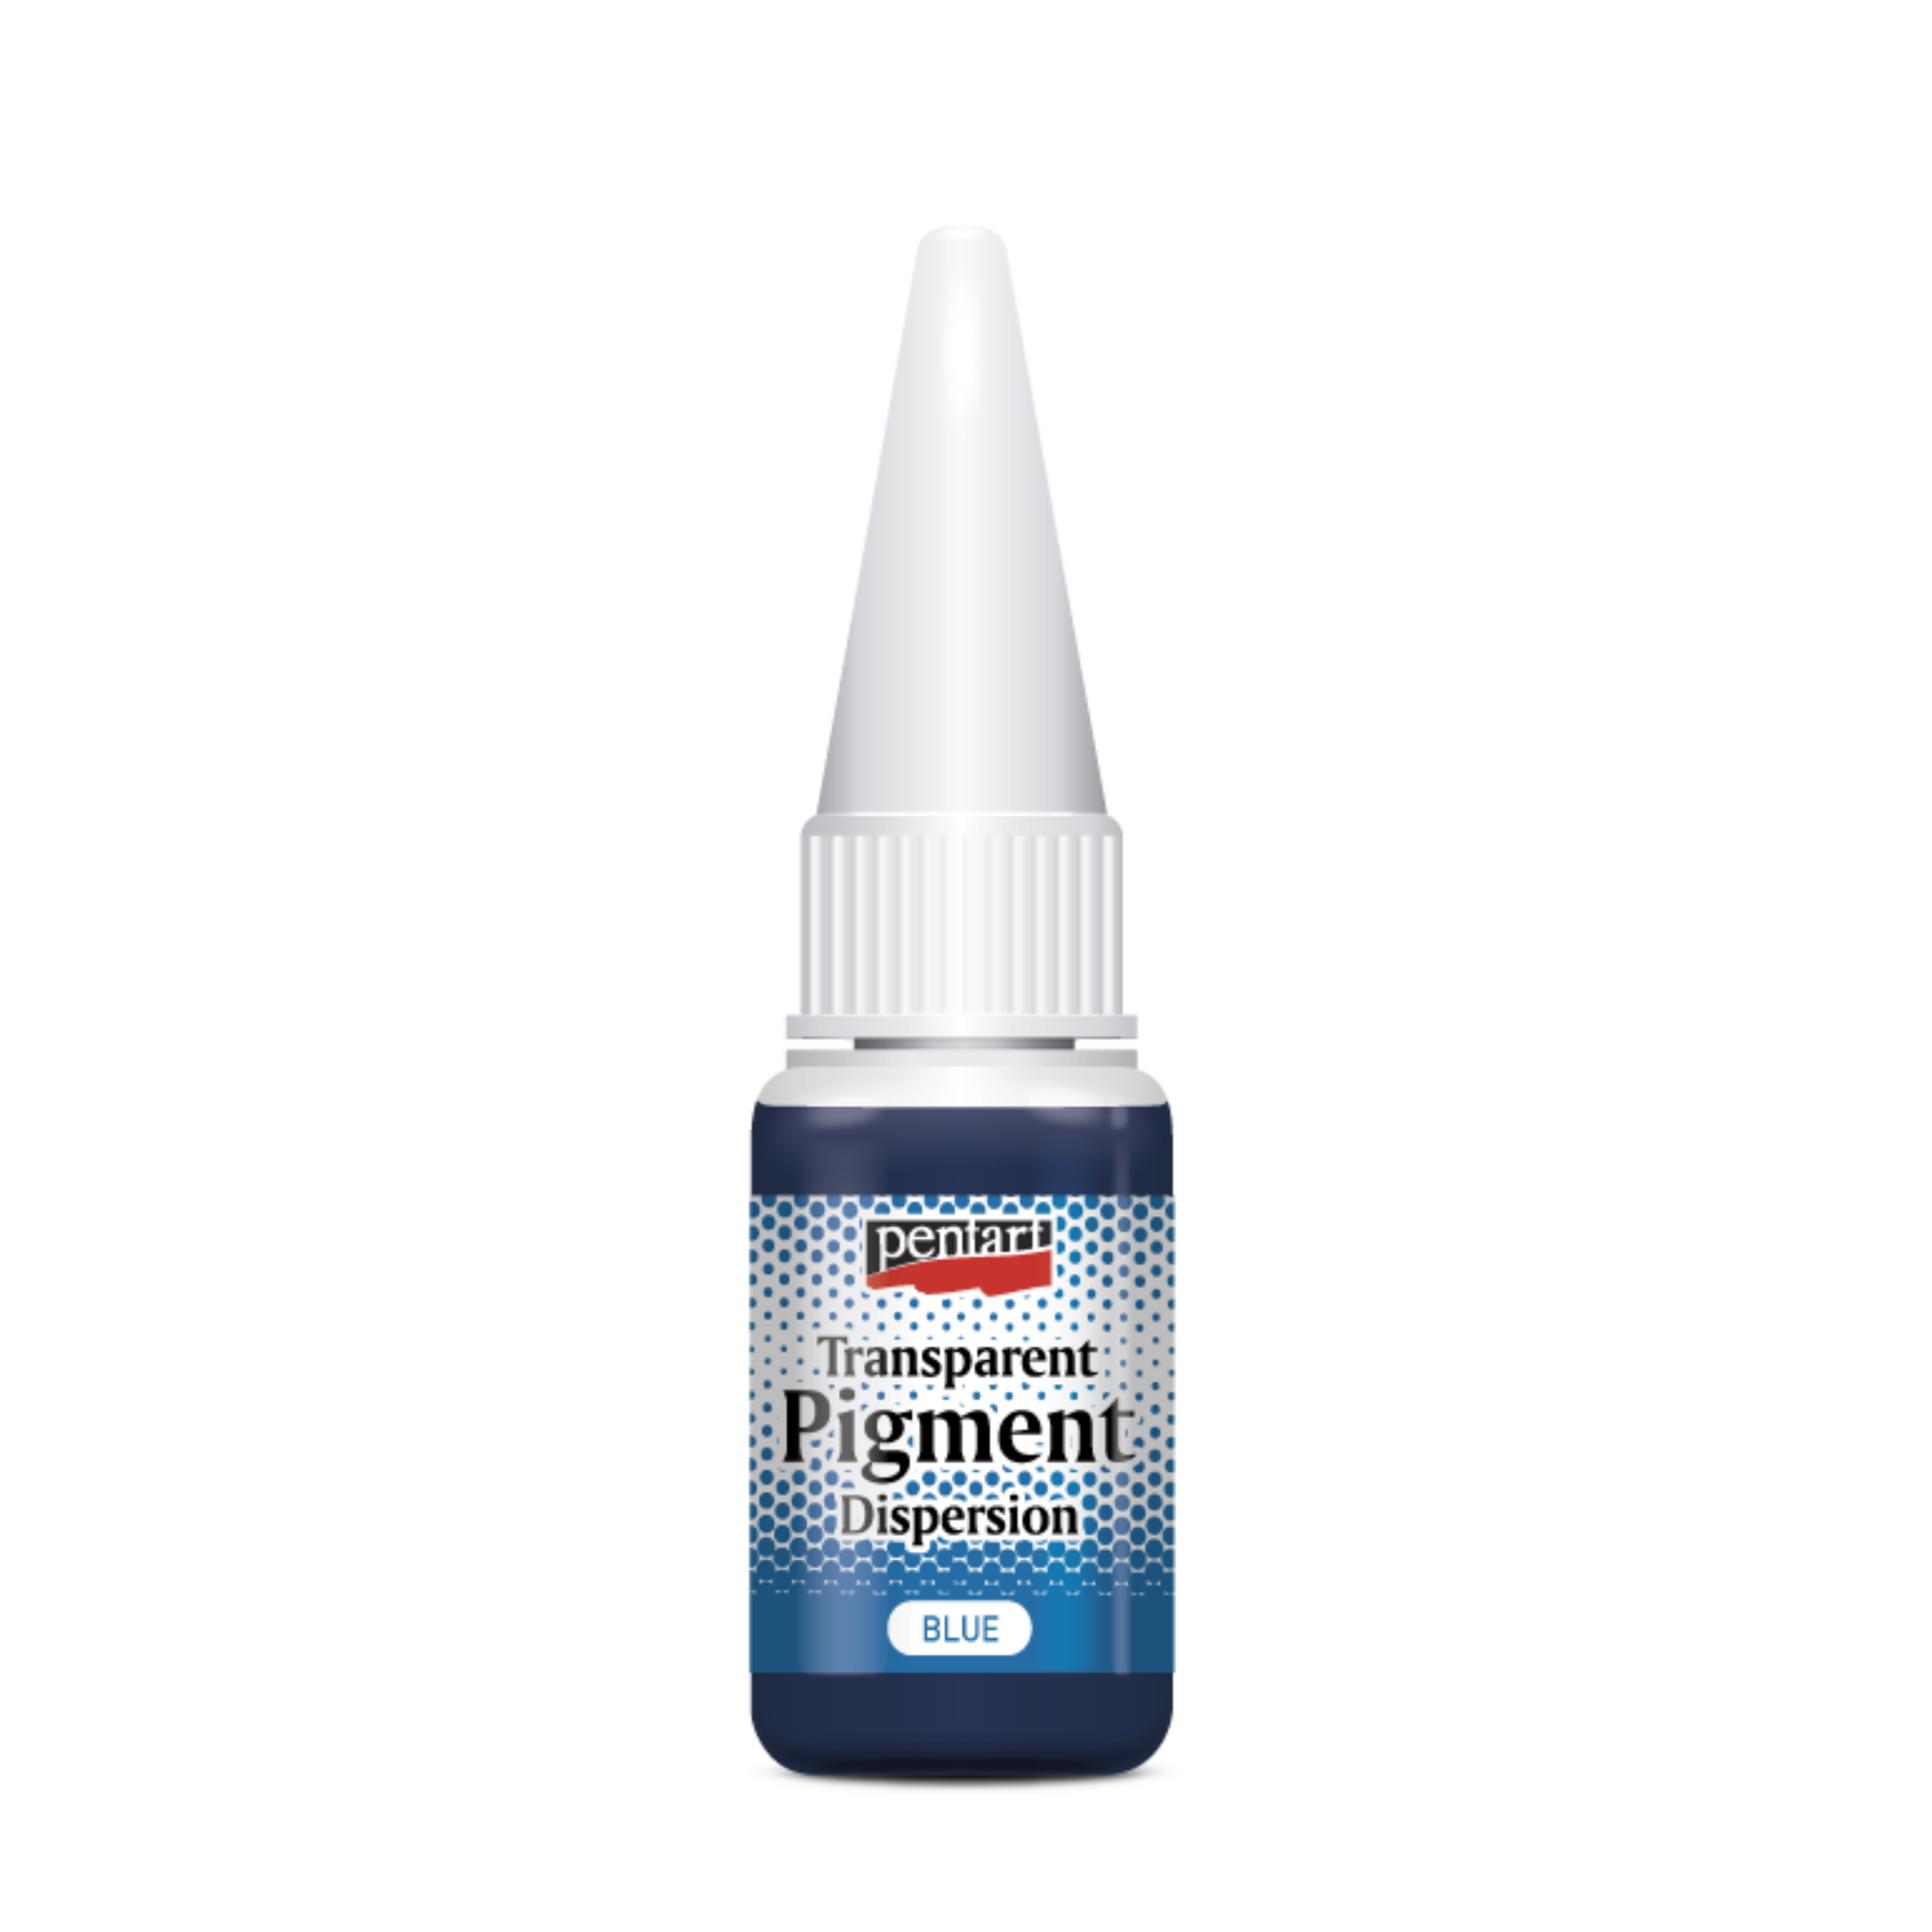 Transparent Pigment Dispersion in Blue by Pentart available at Milton's Daughter.